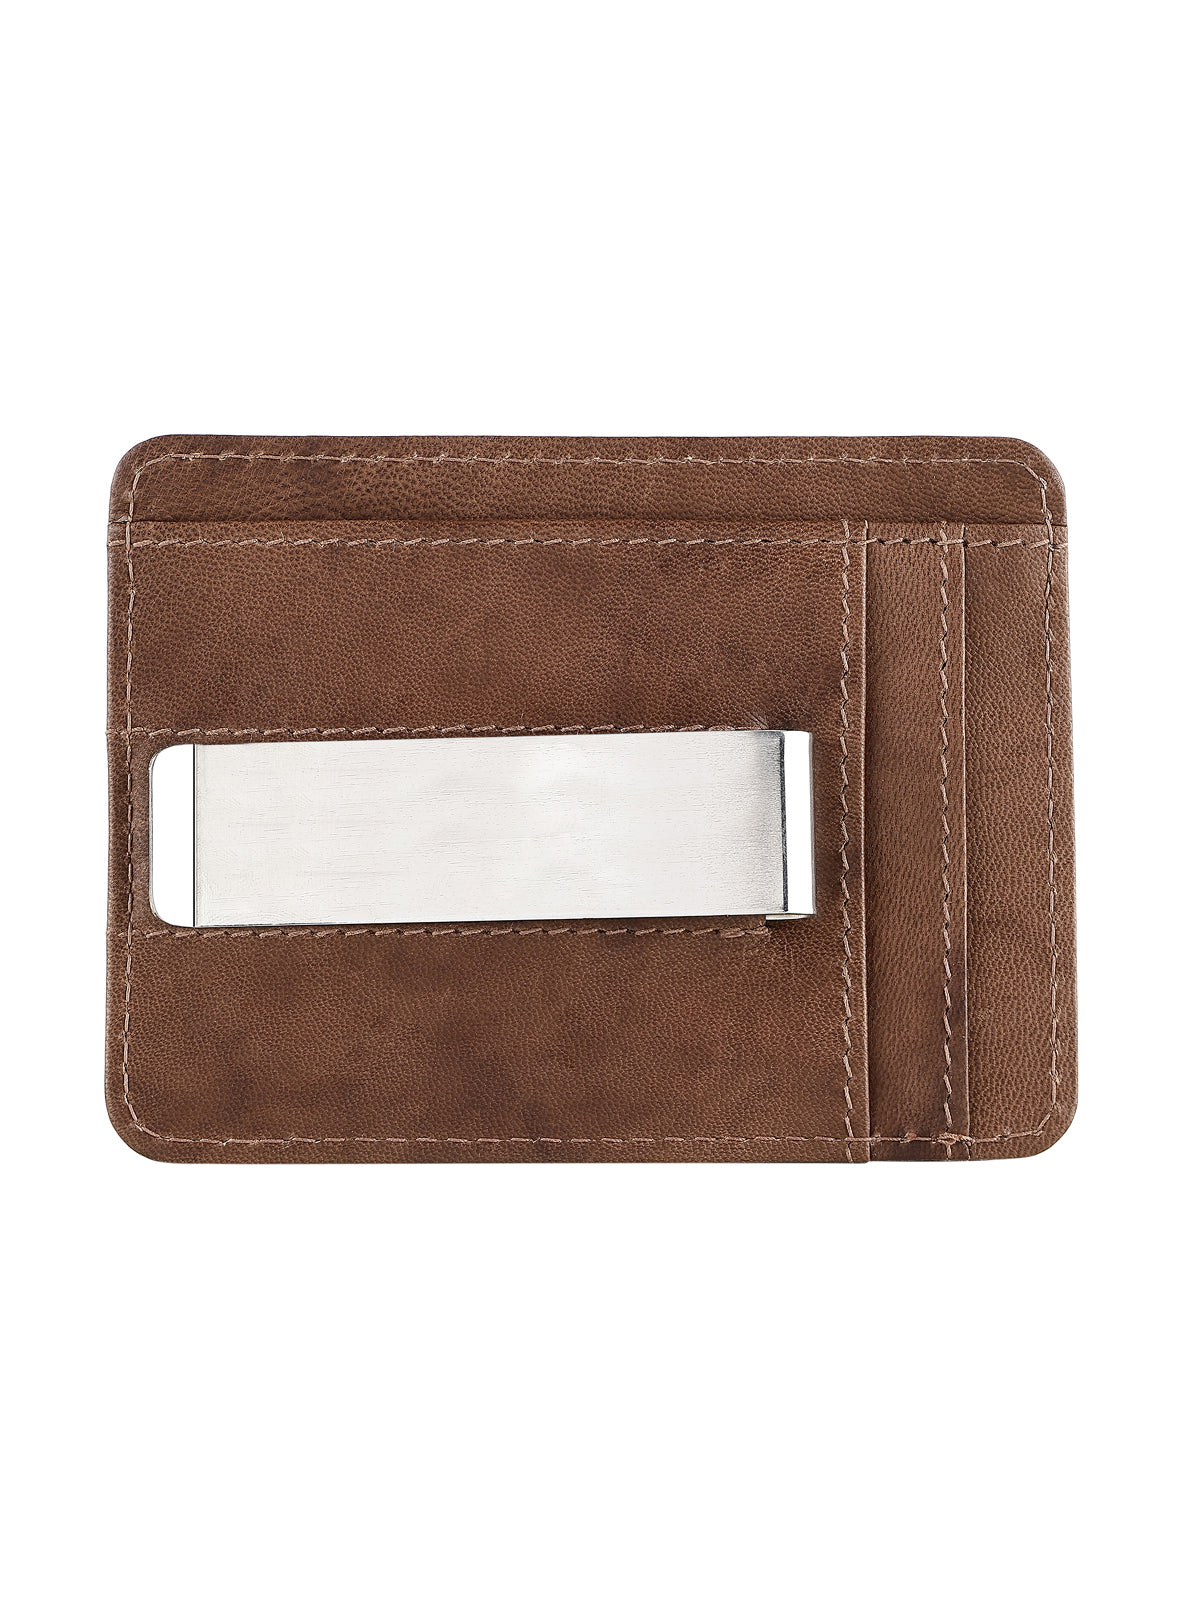 Genuine Leather Dual Tone Card Holder for Men's with Money Clip and 4 Card Holder Slot